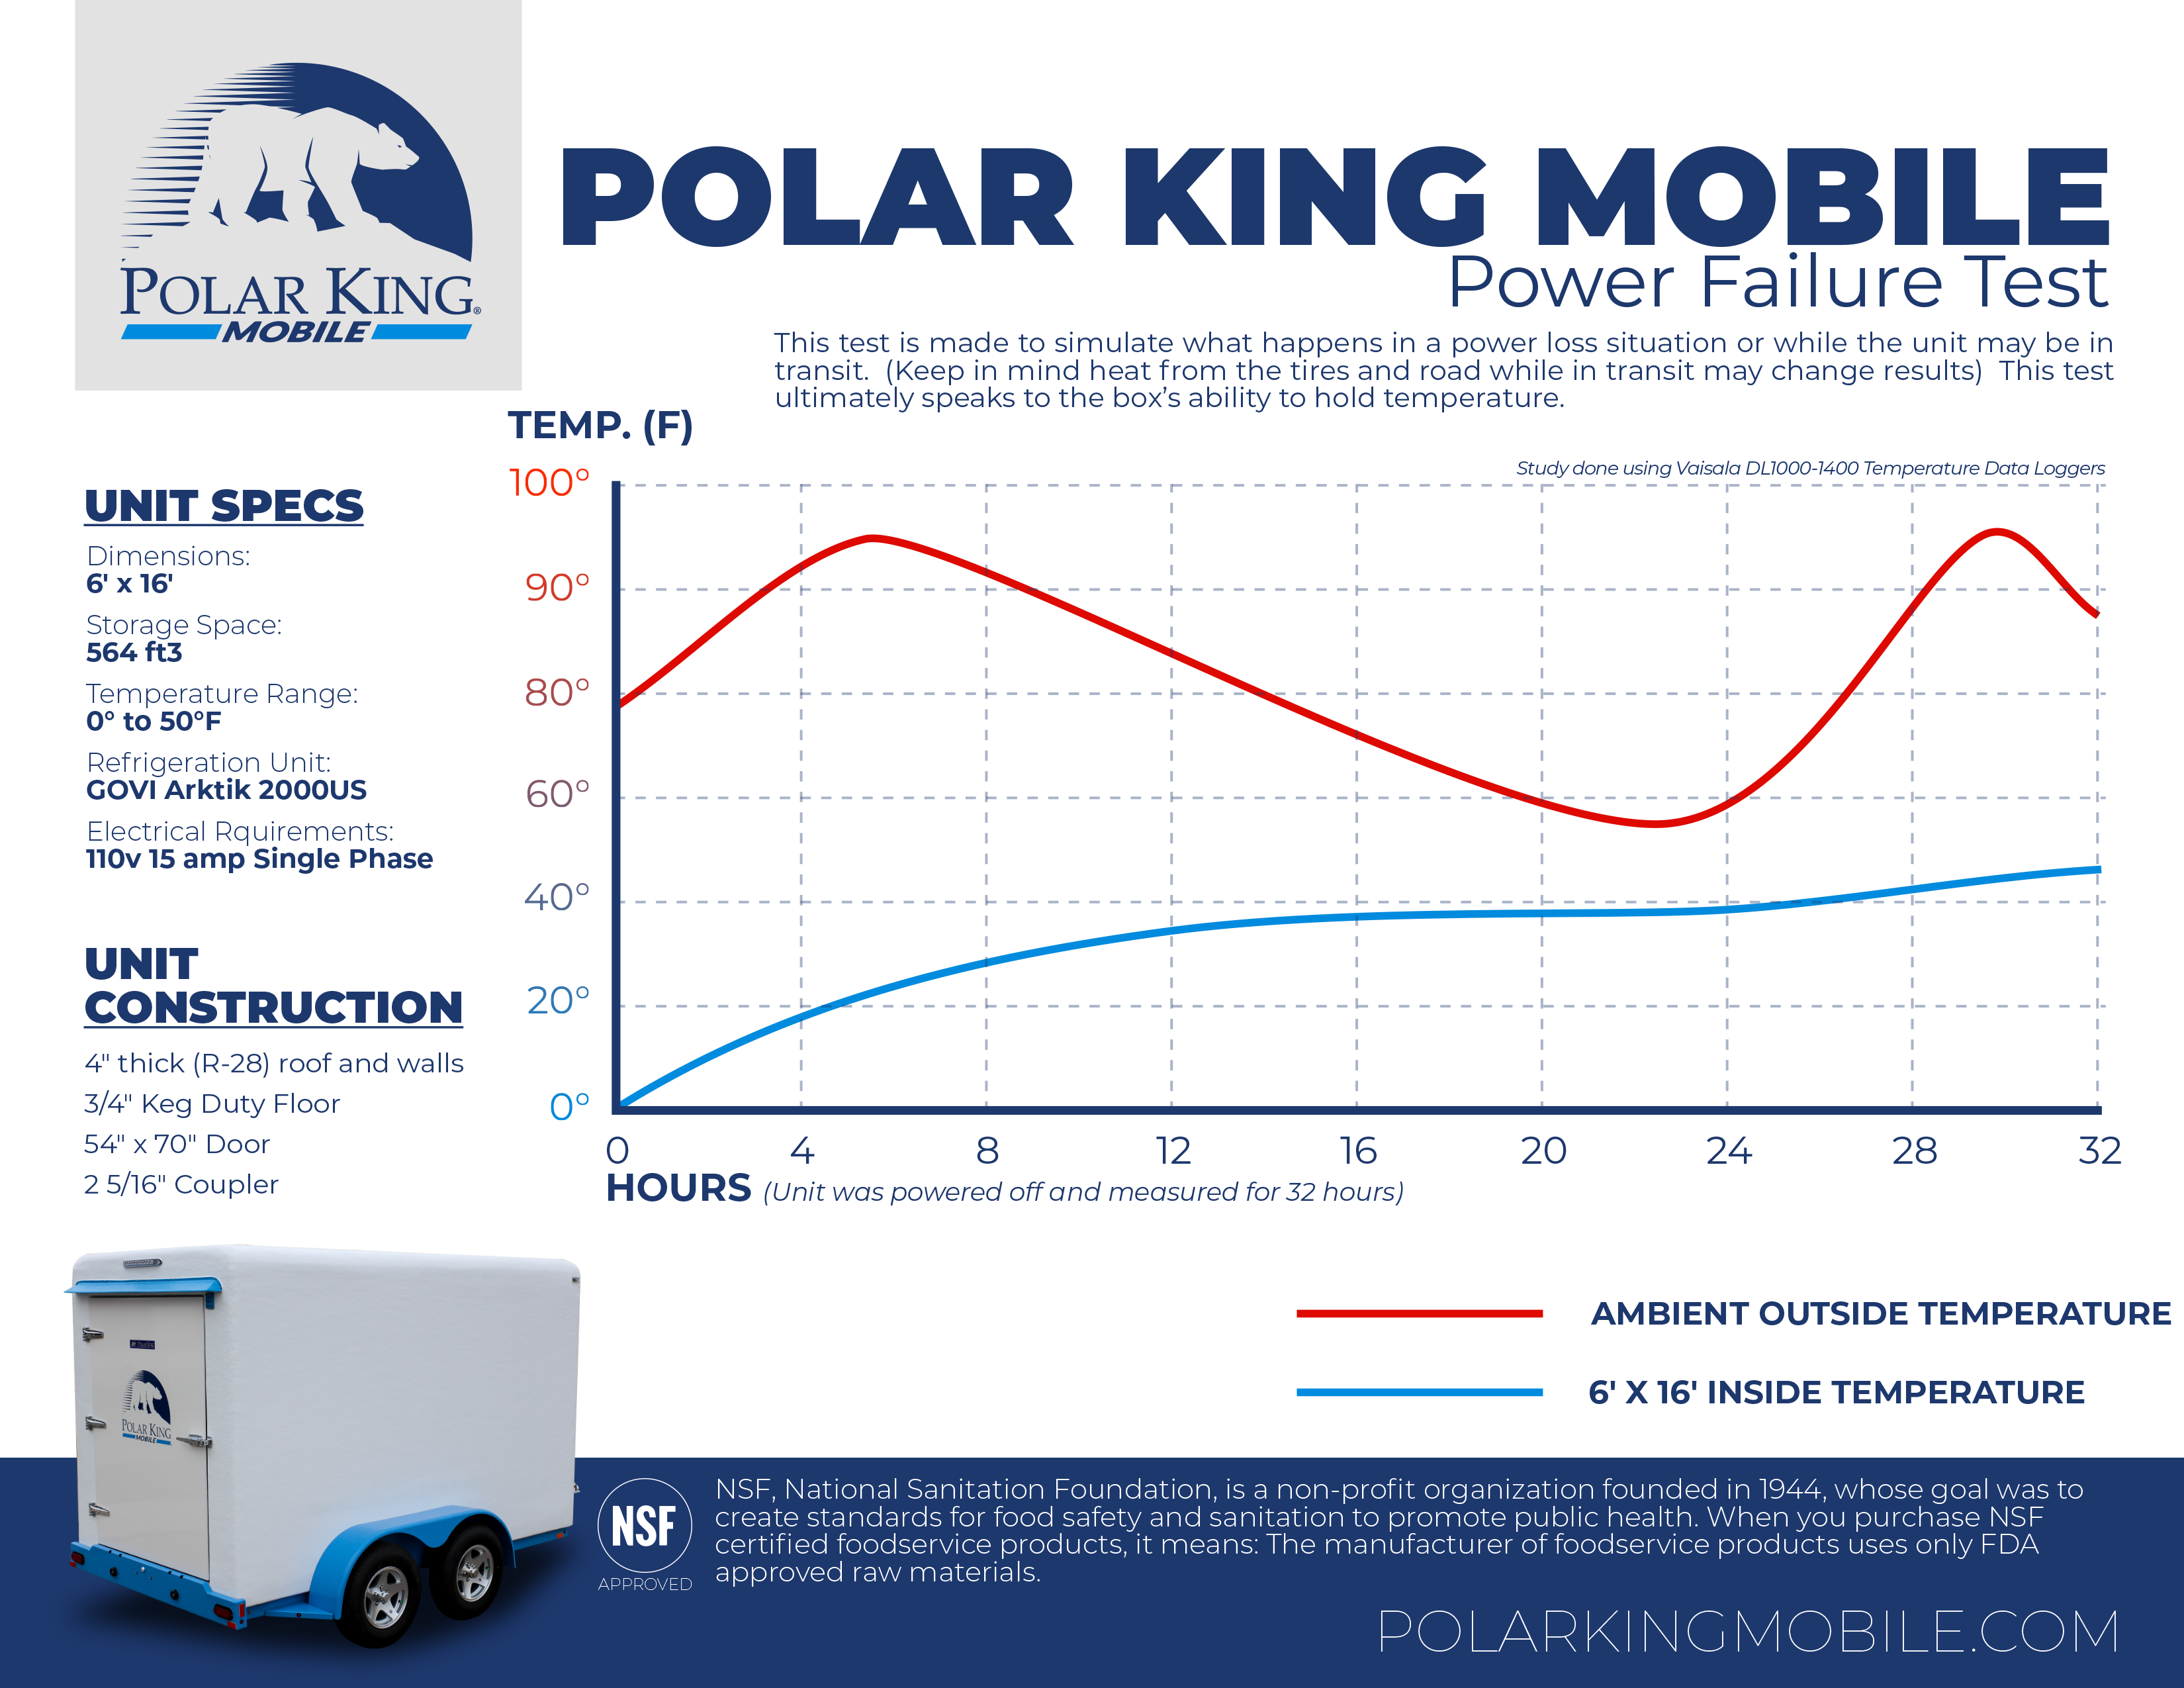 https://smallrefrigeratedtrailersales.com/-images/Polar-King-Mobile/Drawings/PKM%20Power%20Failure%20Graph.png